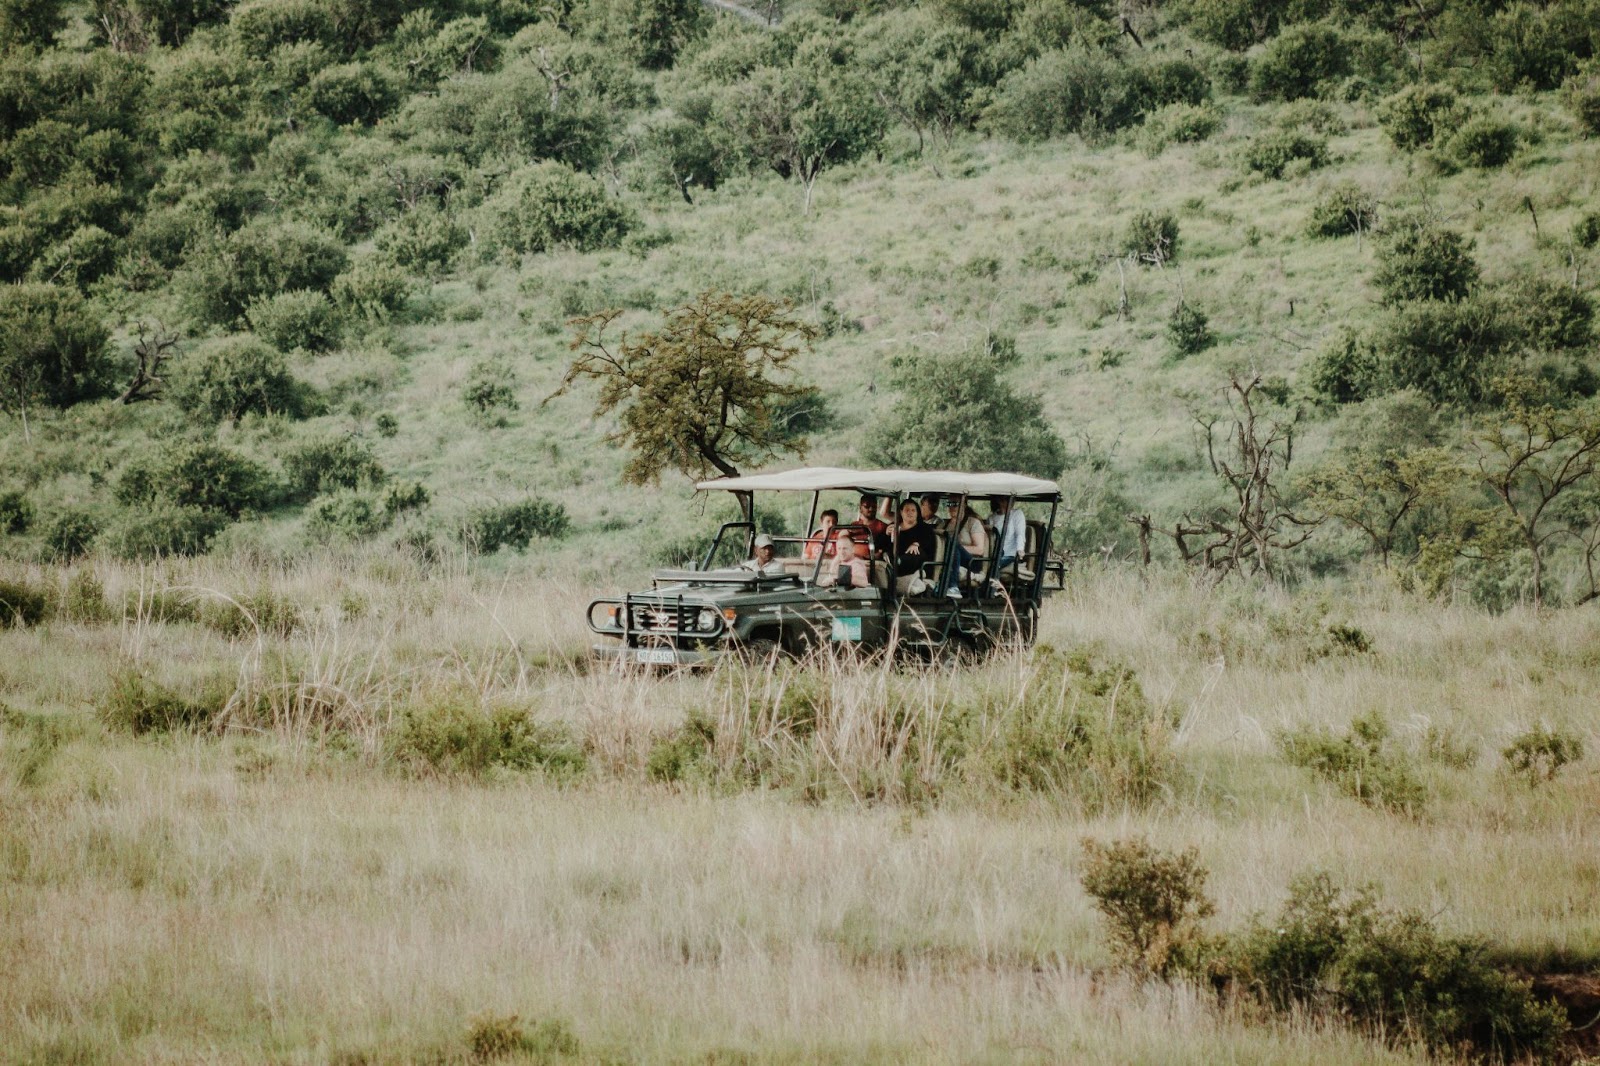 A picture of a safari vehicle while guests are on a guided safari tour